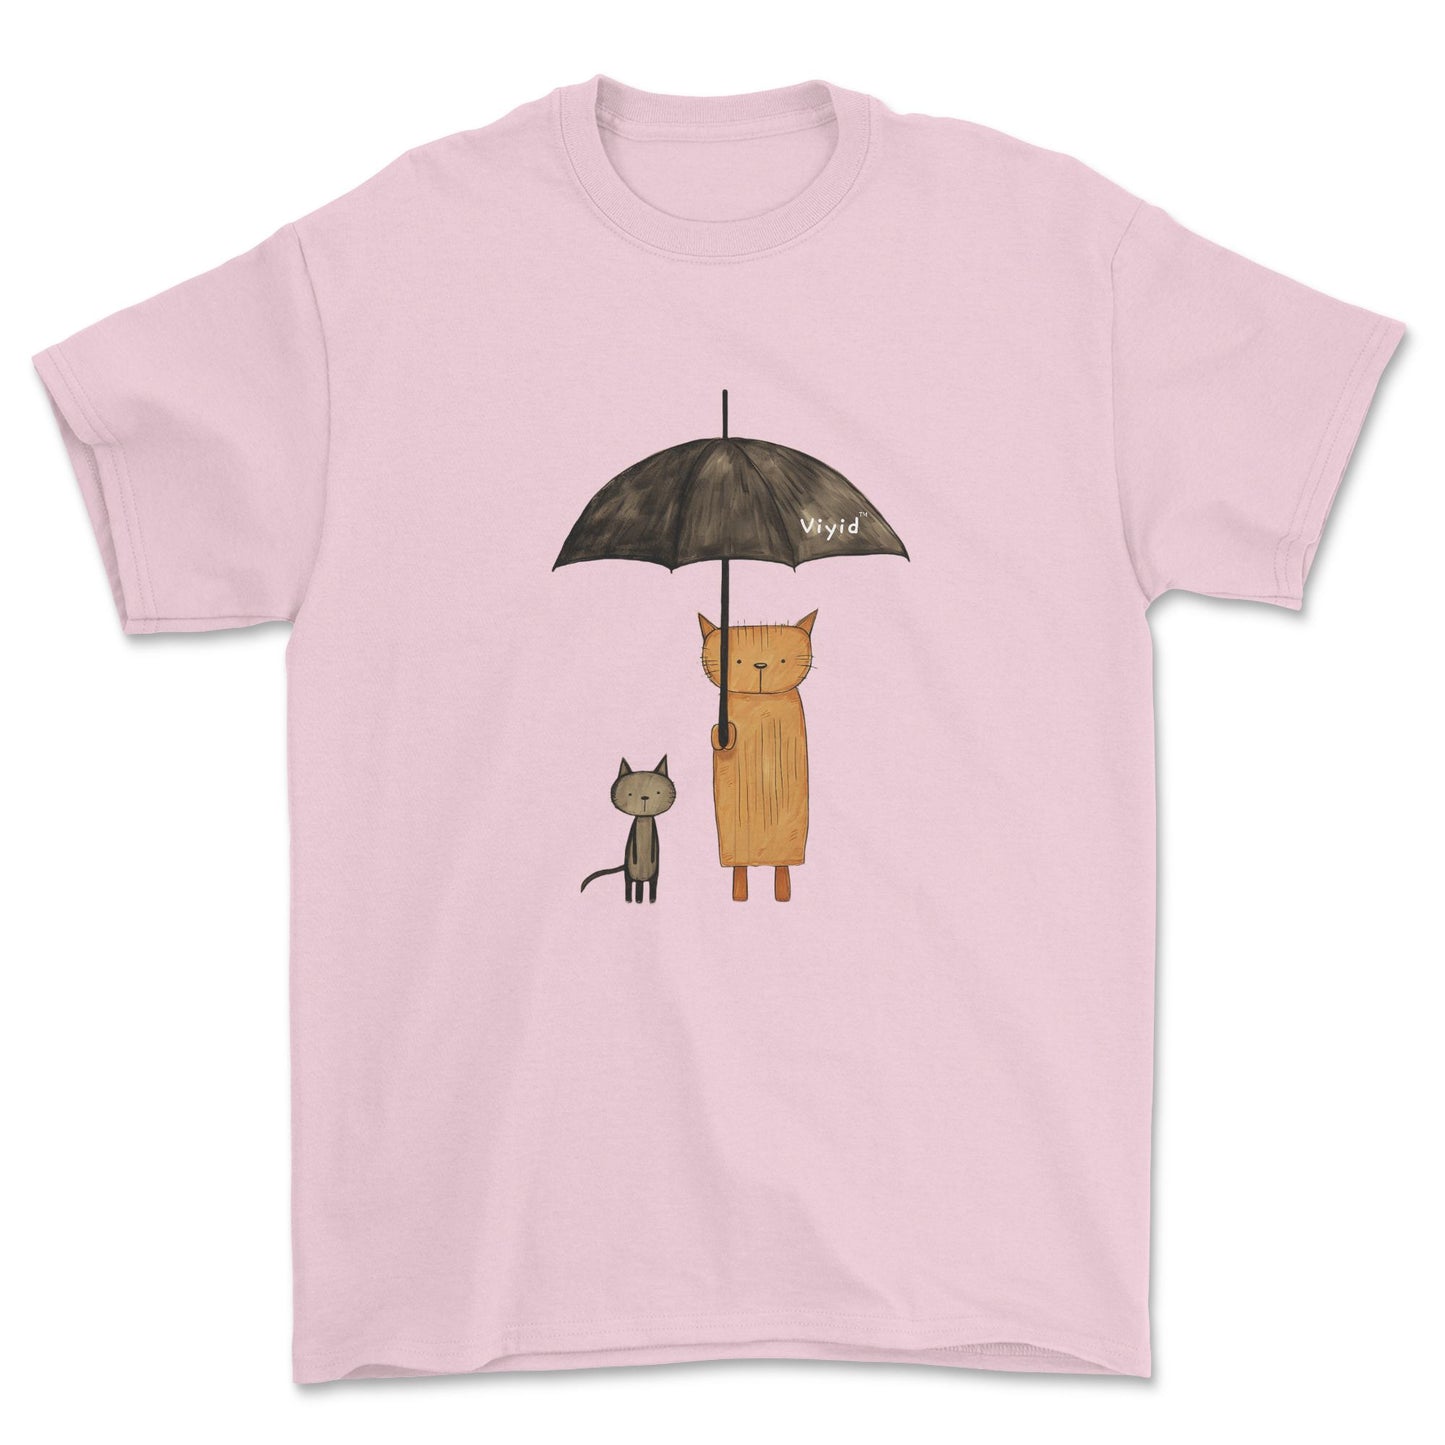 abstract cats with umbrella adult t-shirt light pink